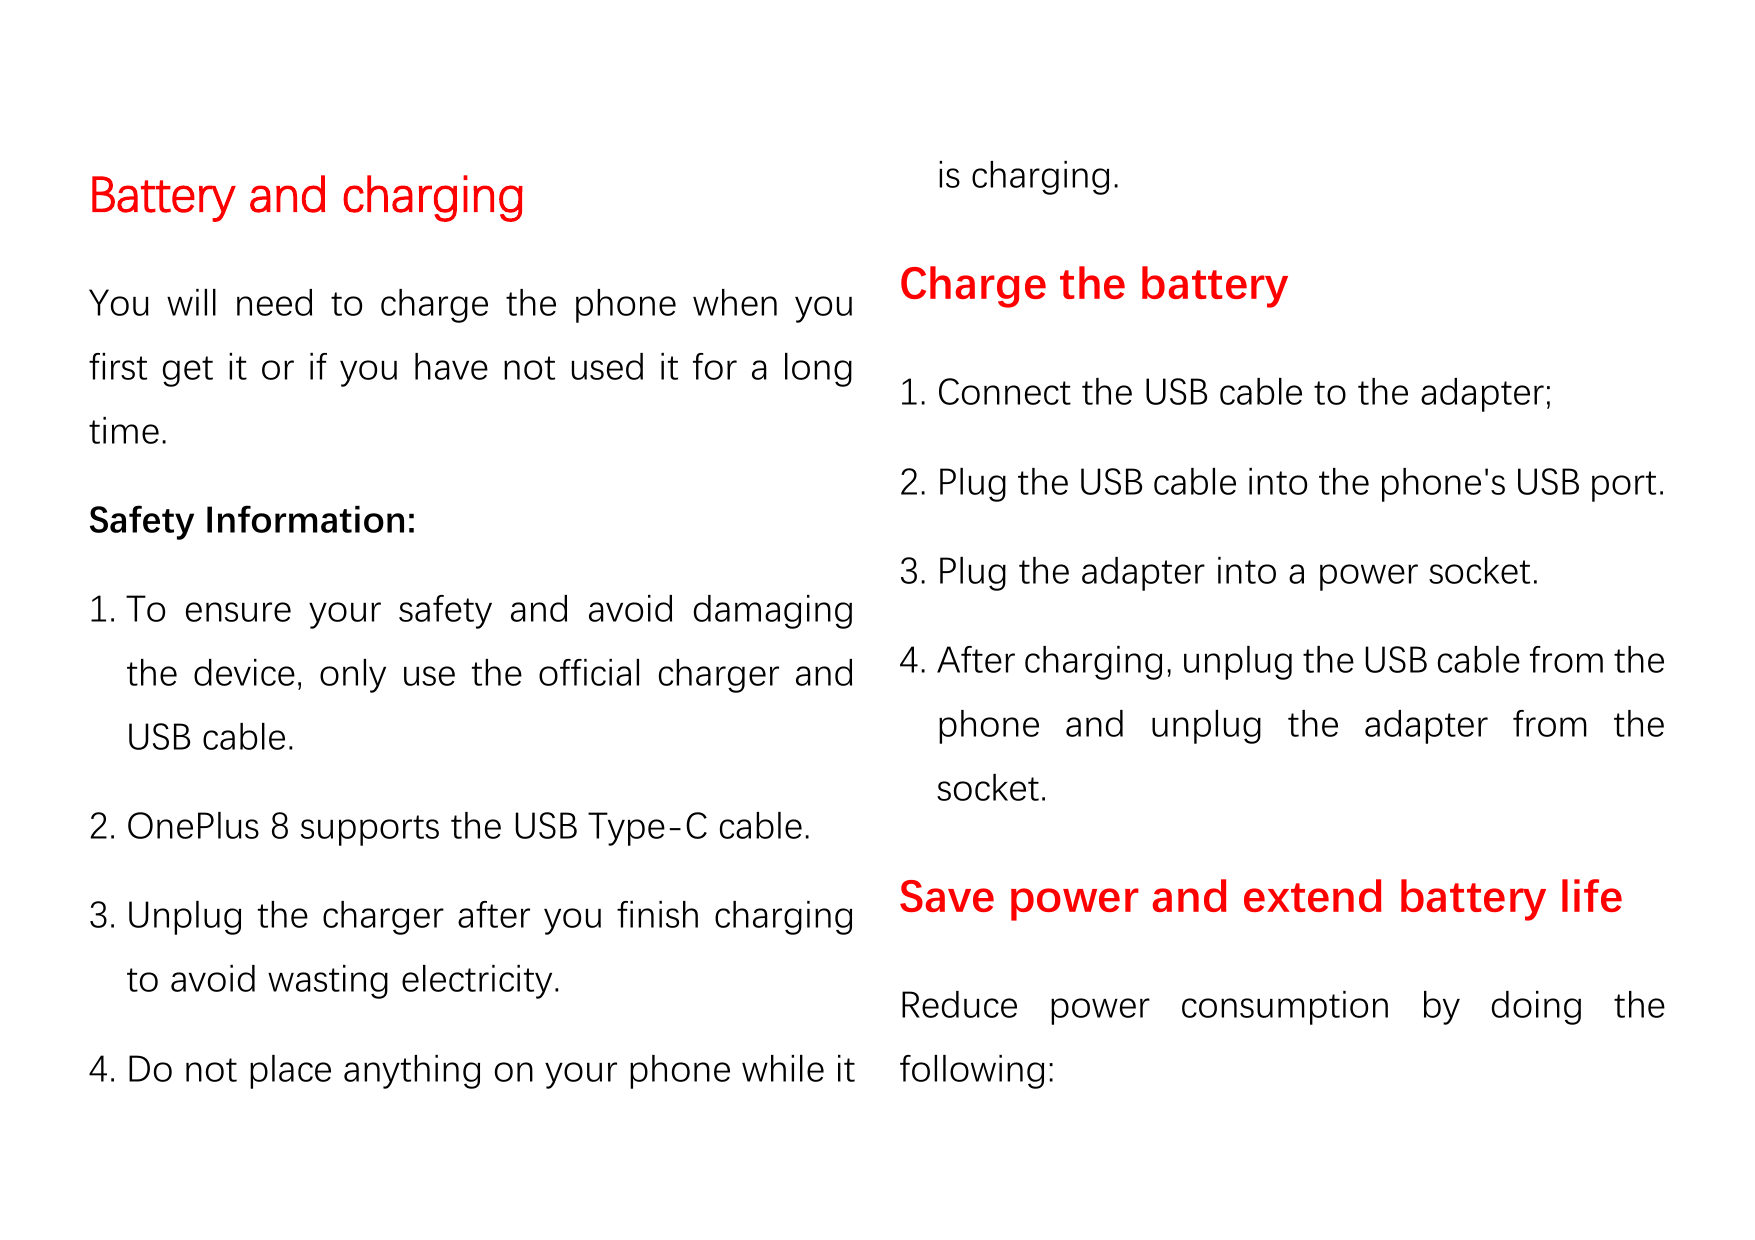 Battery and chargingYou will need to charge the phone when youfirst get it or if you have not used it for a longtime.Safety Info